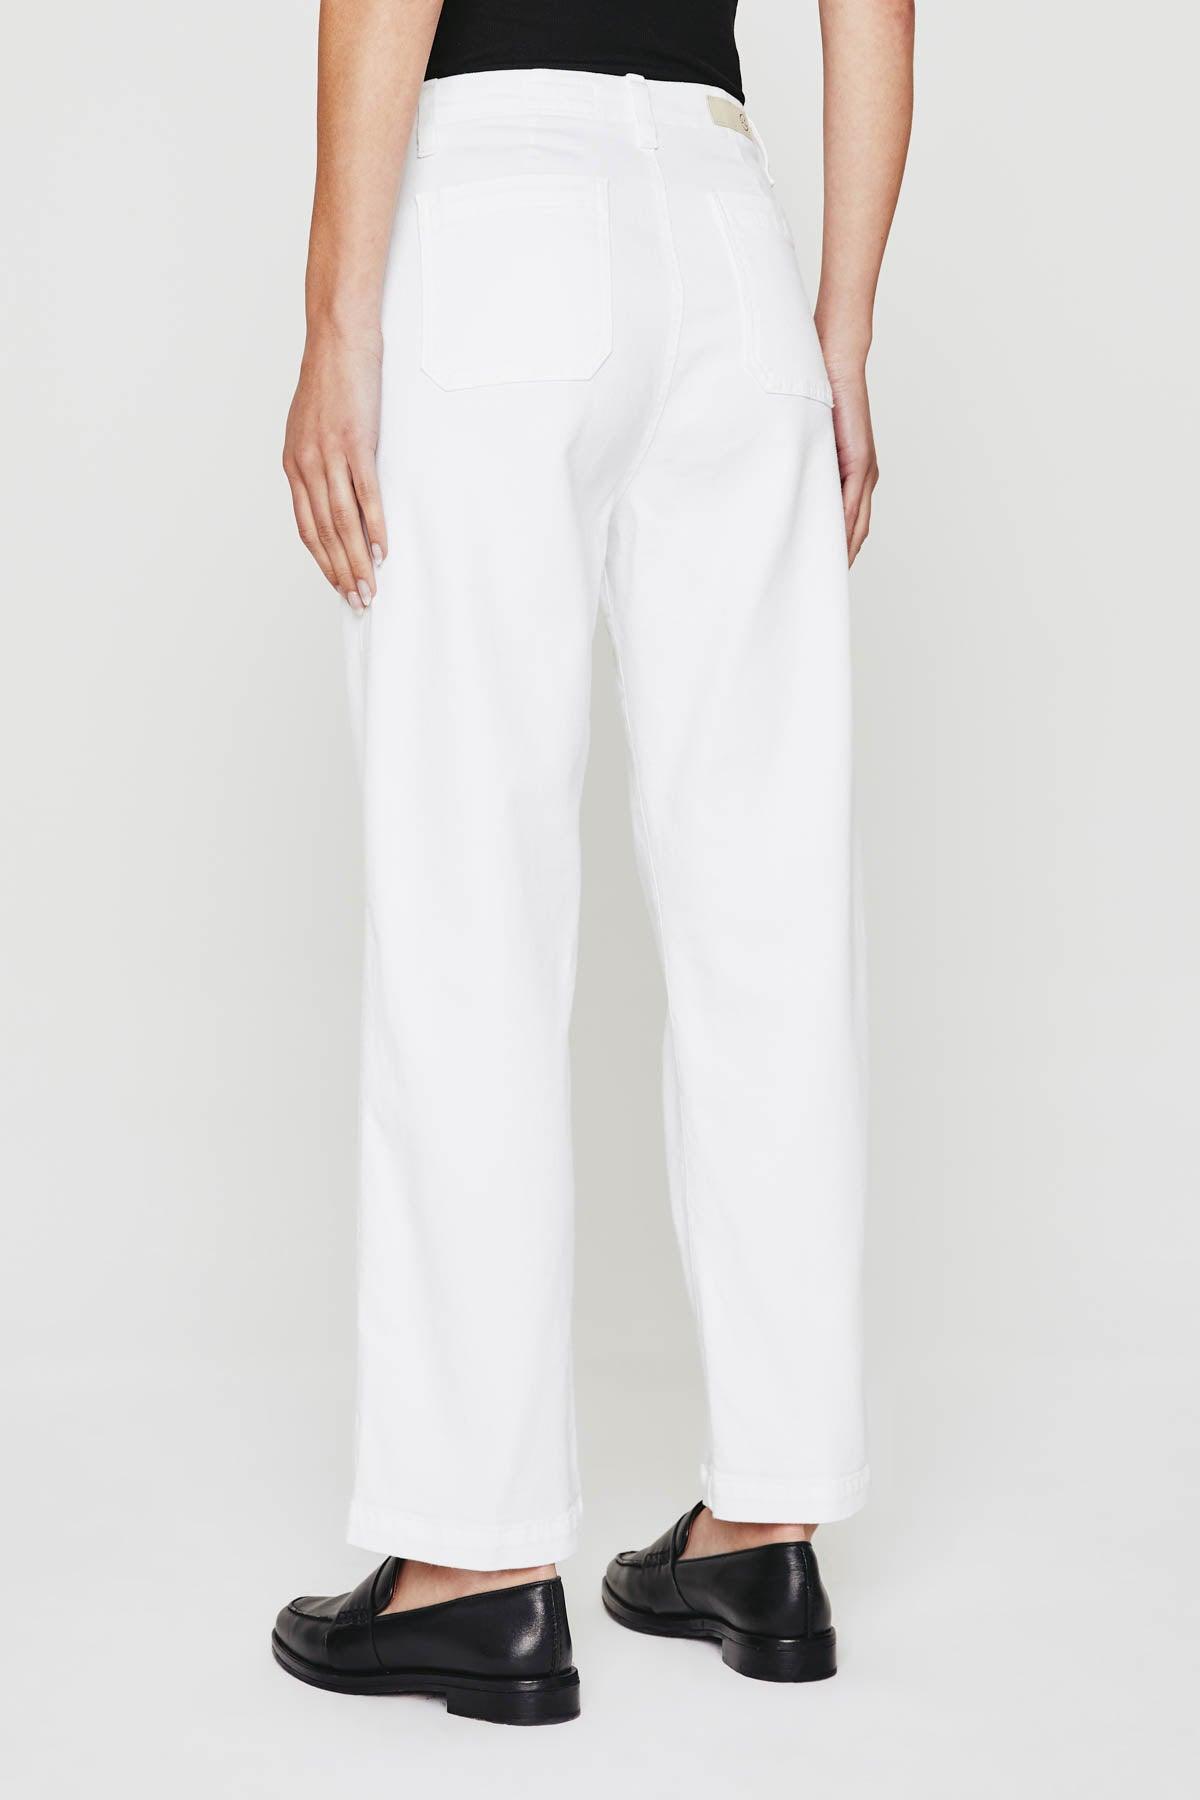 AG - Analeigh Pant